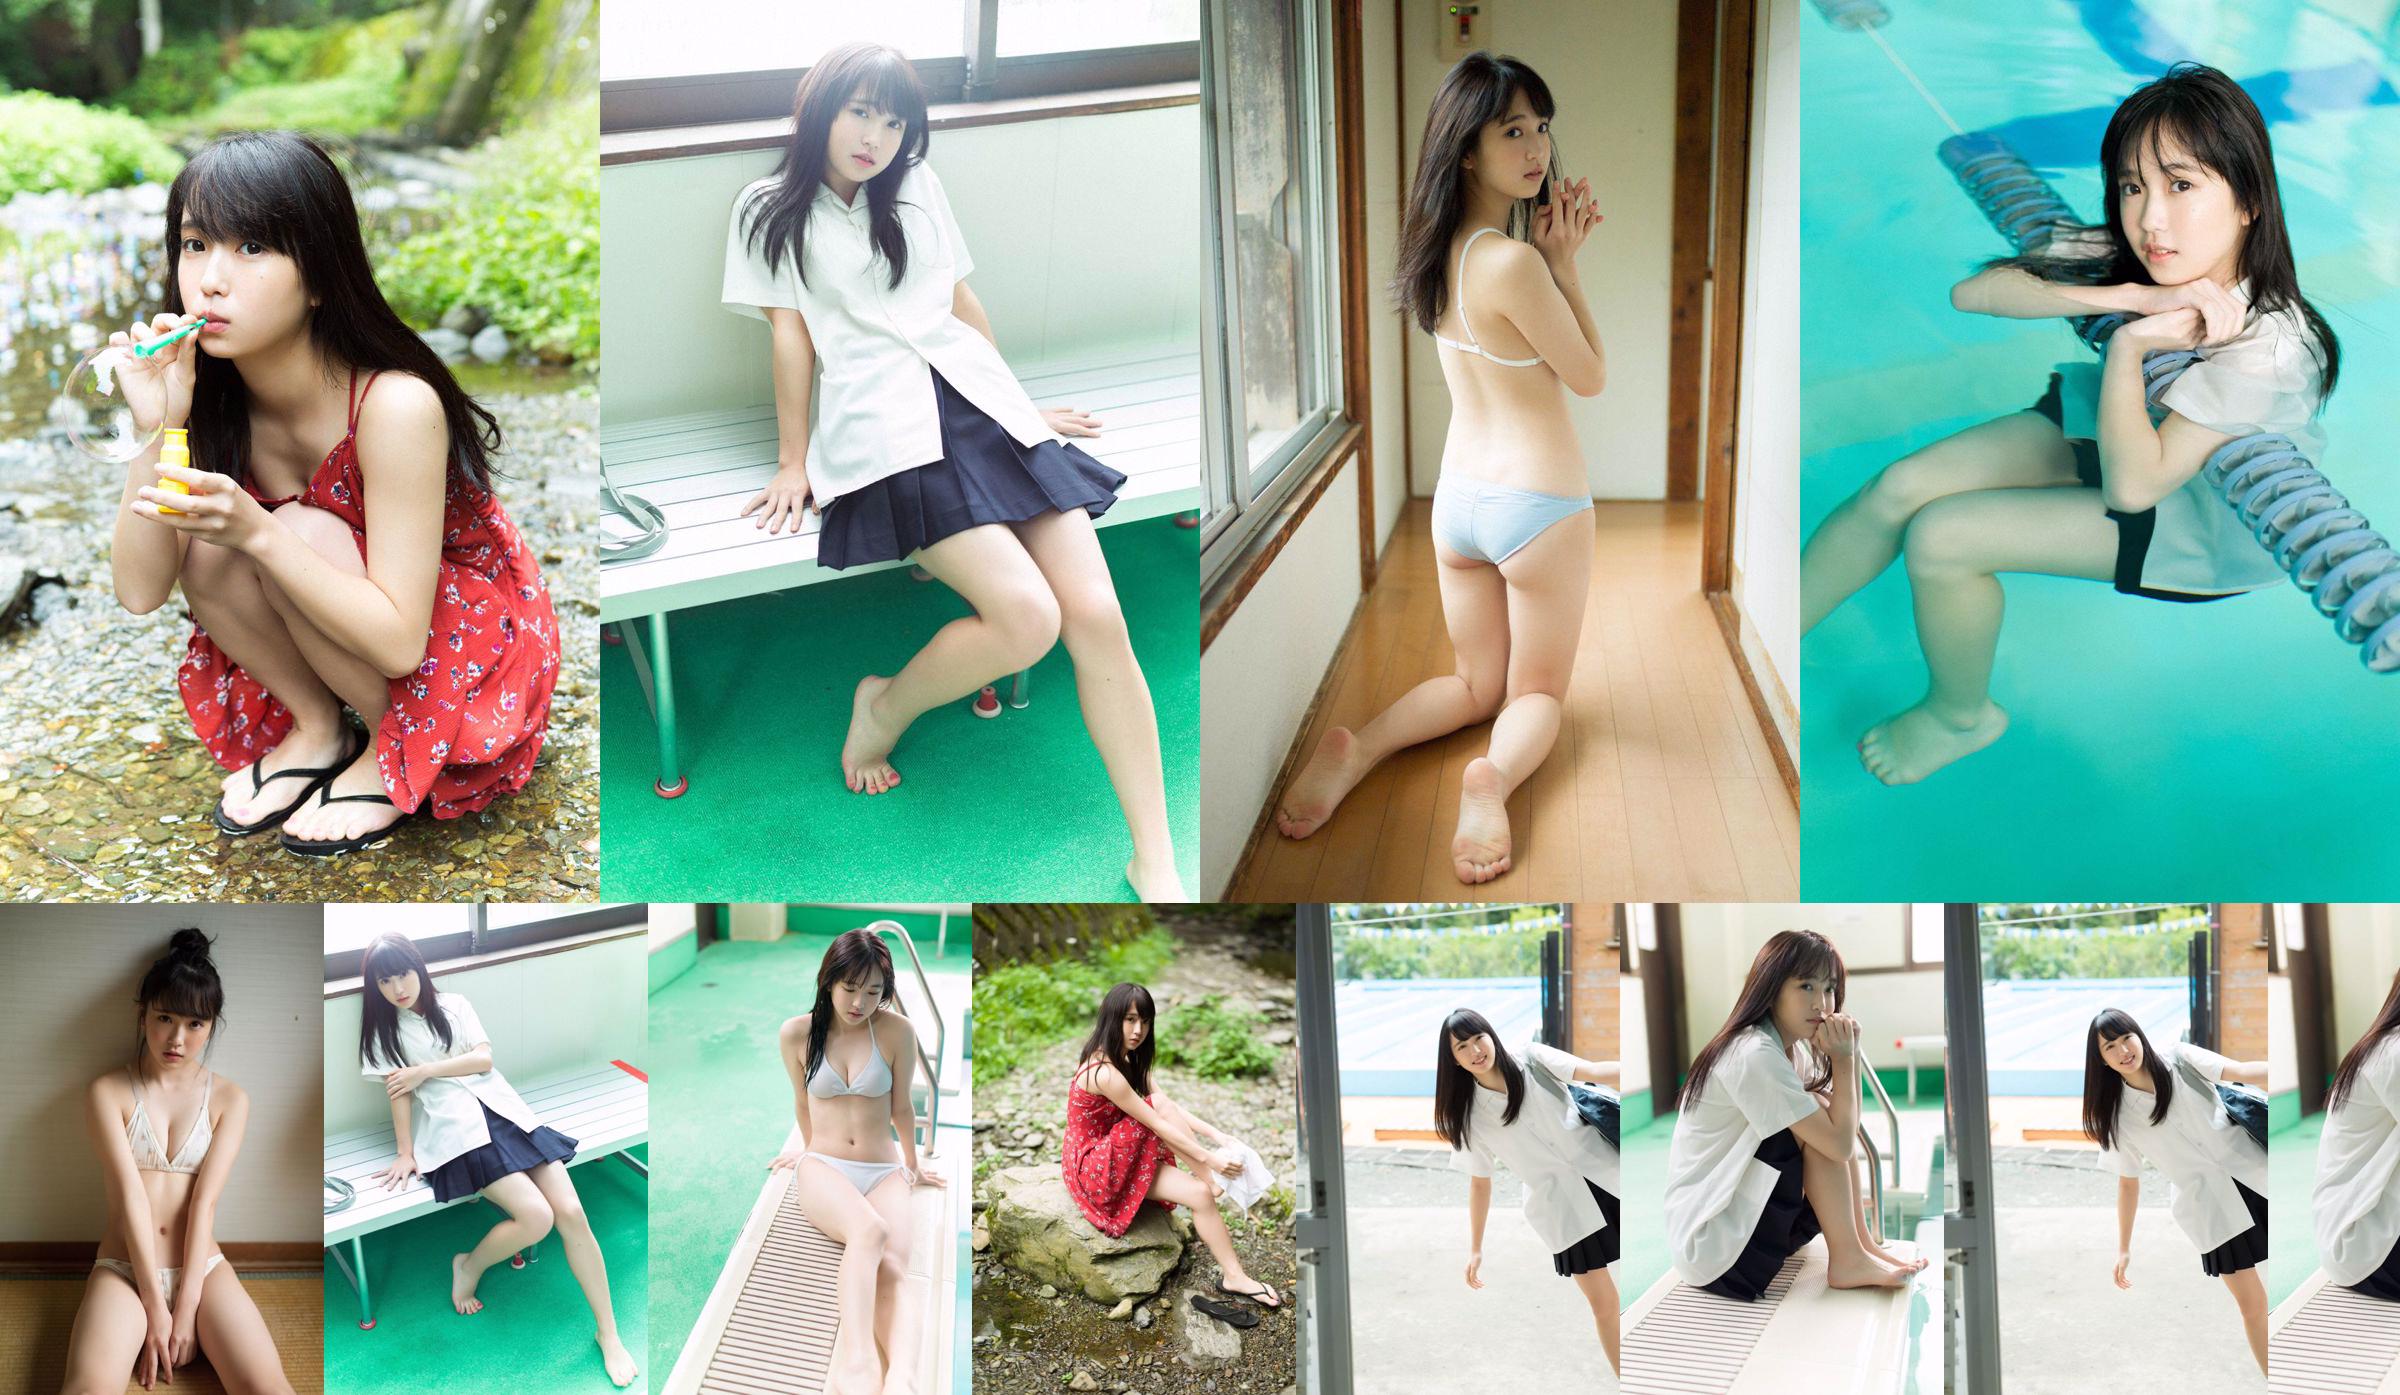 Shiho Fujino << Sommergedächtnis >> [WPB-net] Extra624 No.224a37 Seite 2